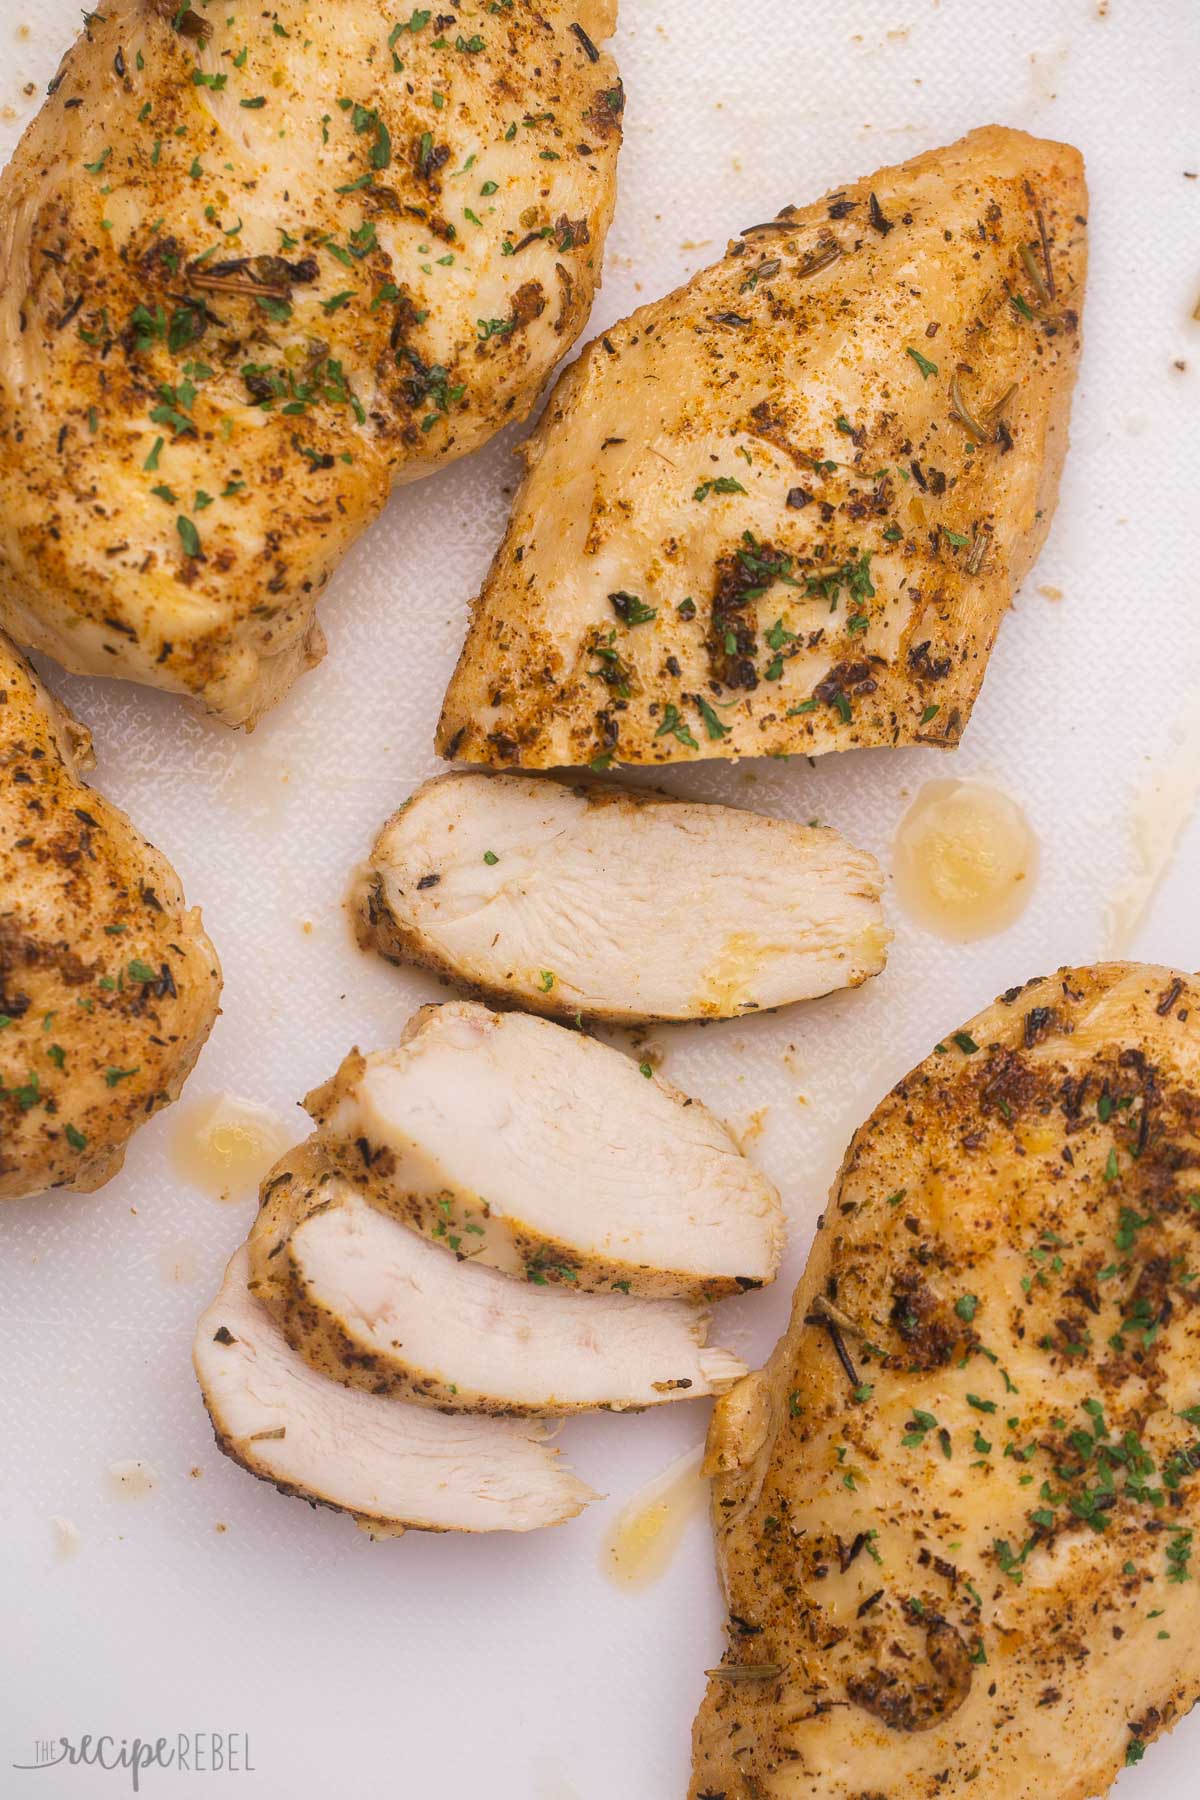 chicken breast partially sliced on white cutting board with whole chicken breasts on the side.